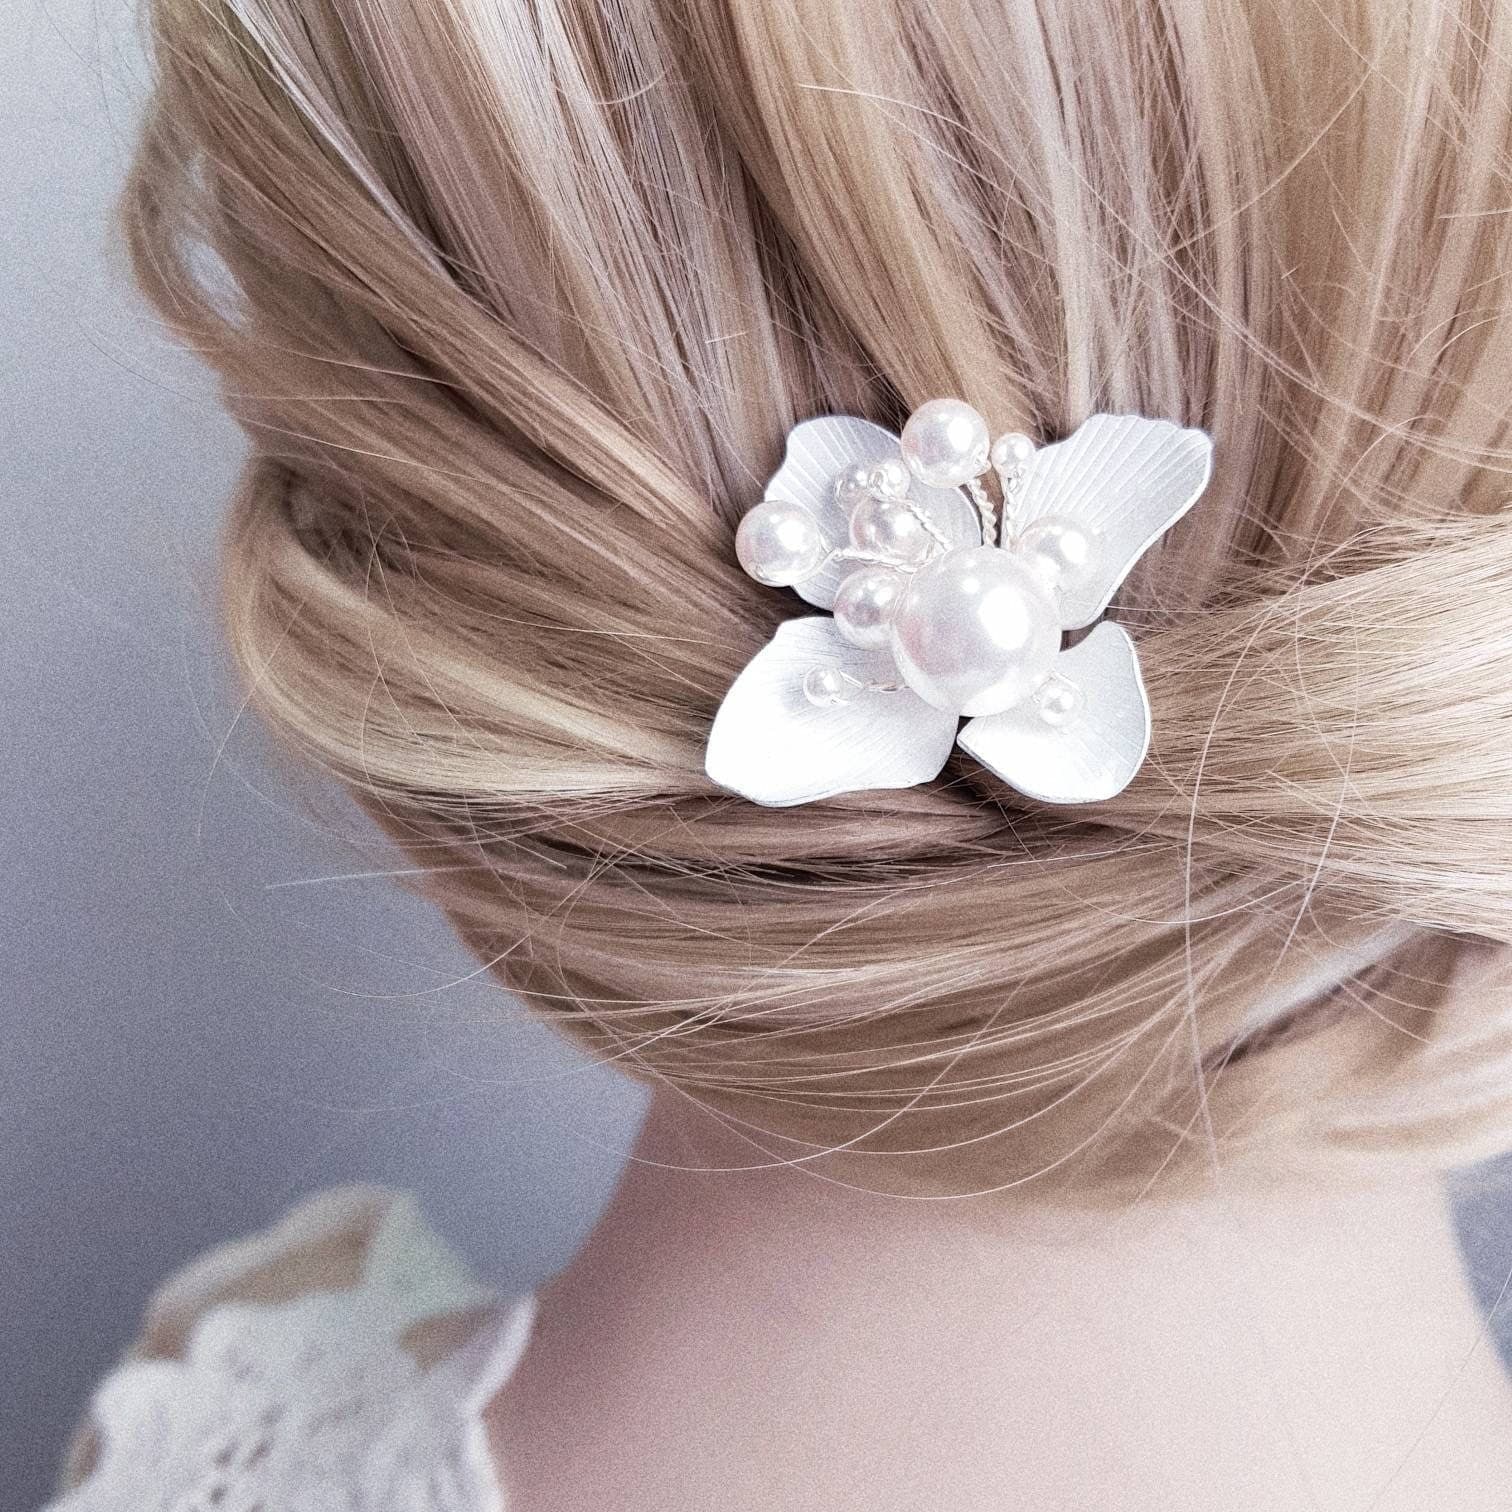 BoutiquebyBrendaLee LA BOULES Hair U Pin Goddess hairpin White Flower hair accessories handcrafted cream pearls beaded Australia